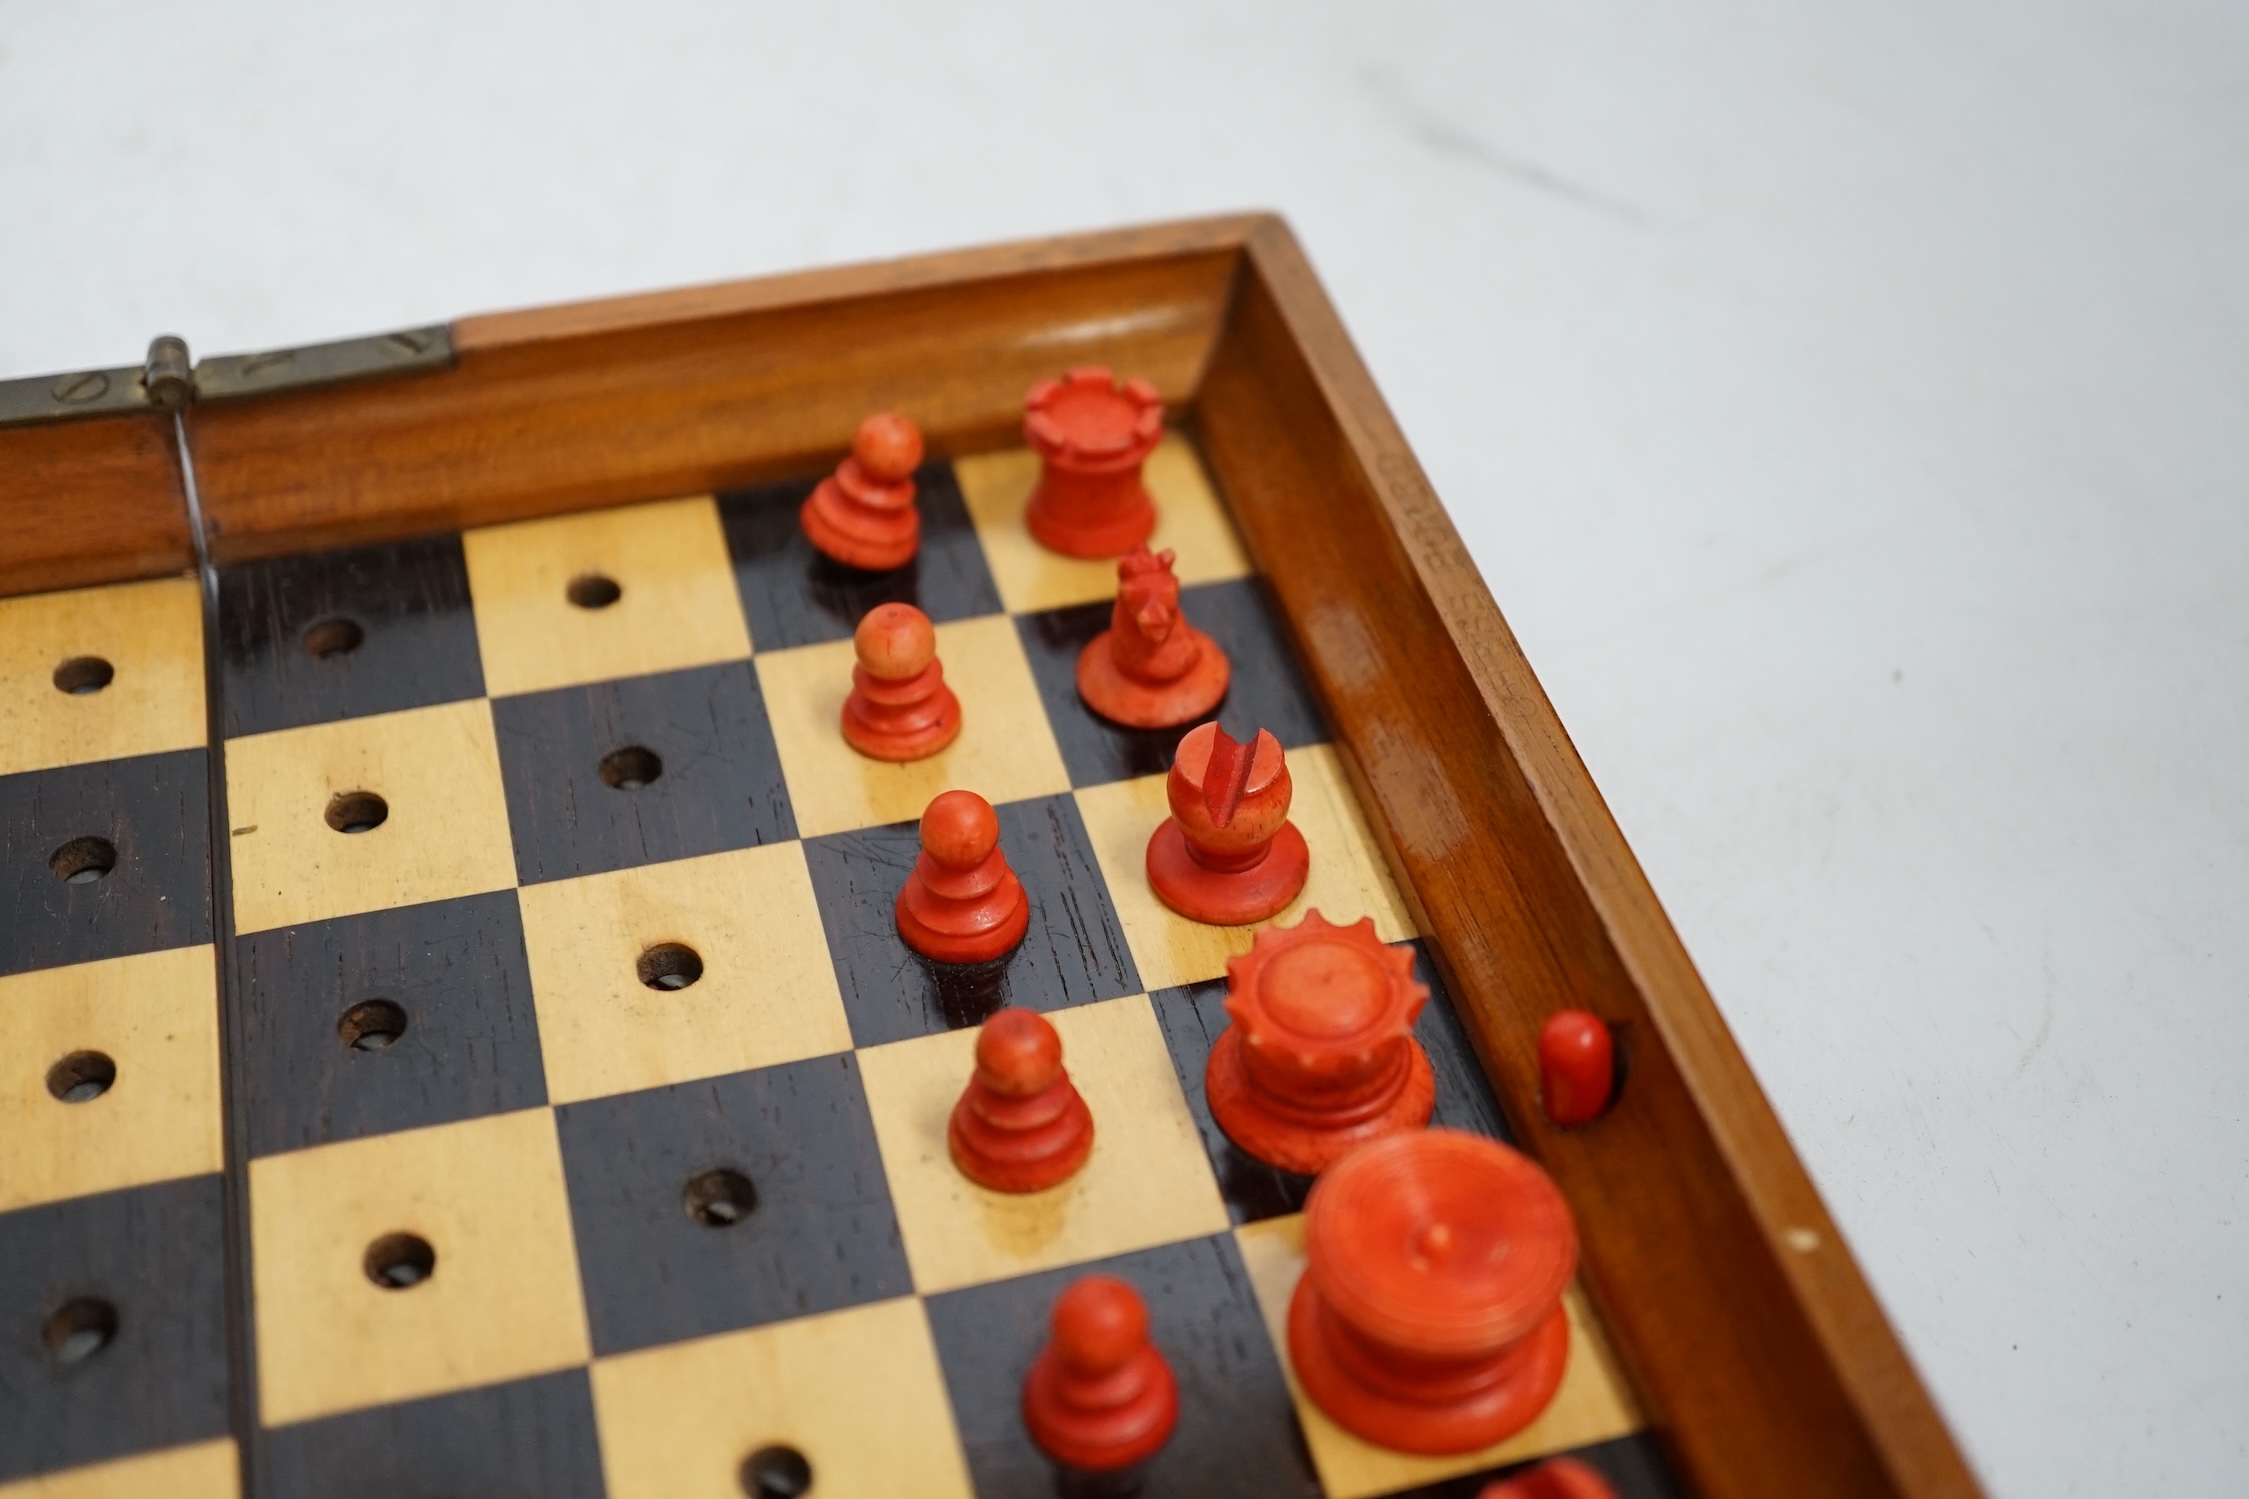 A Jaques in Statu Quo travelling chess set with bone pieces, leather slip case. Condition - fair